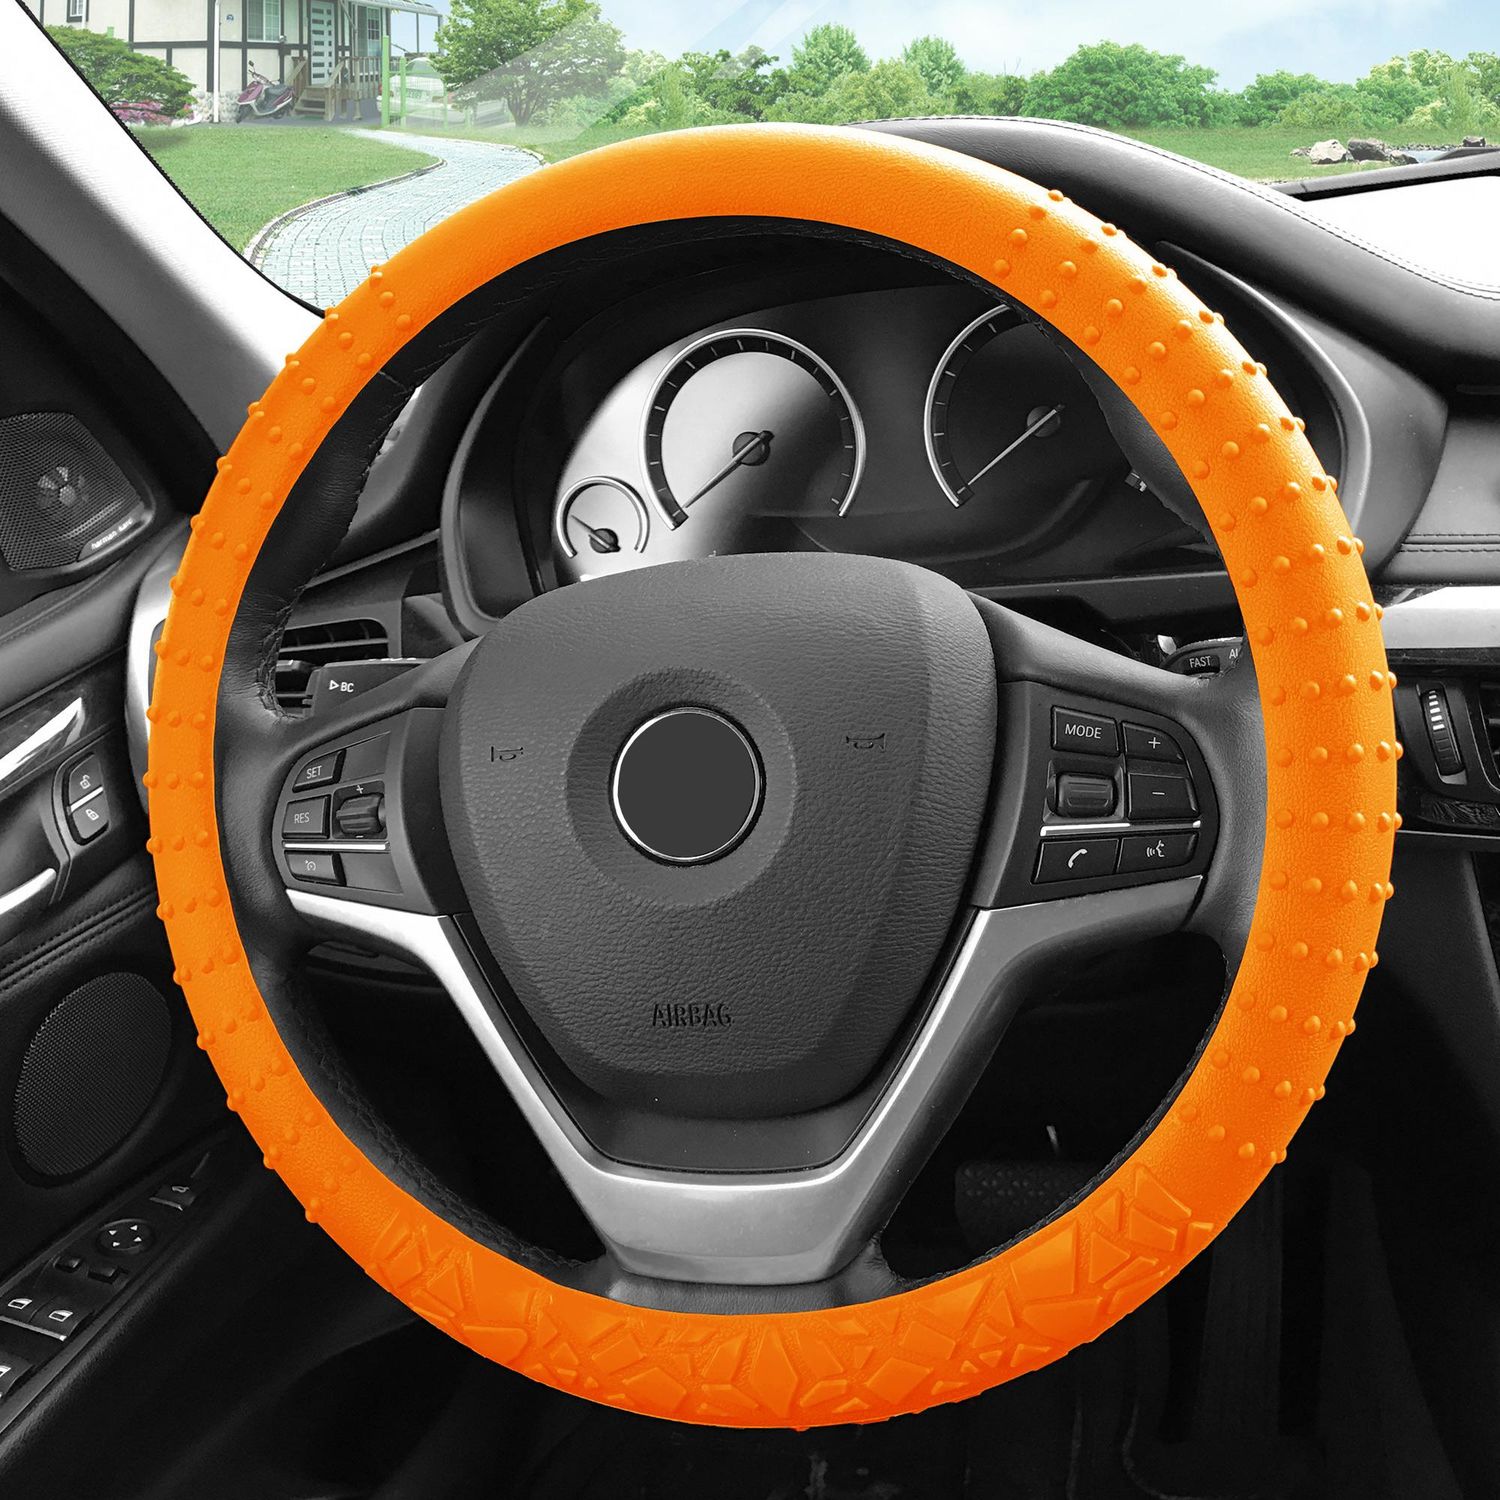 FH Group Automotive Seat Covers Combo Silicone Steering Wheel Cover Full  Set Car Accessories Orange, Striking Striped Seat Covers Airbag and Split